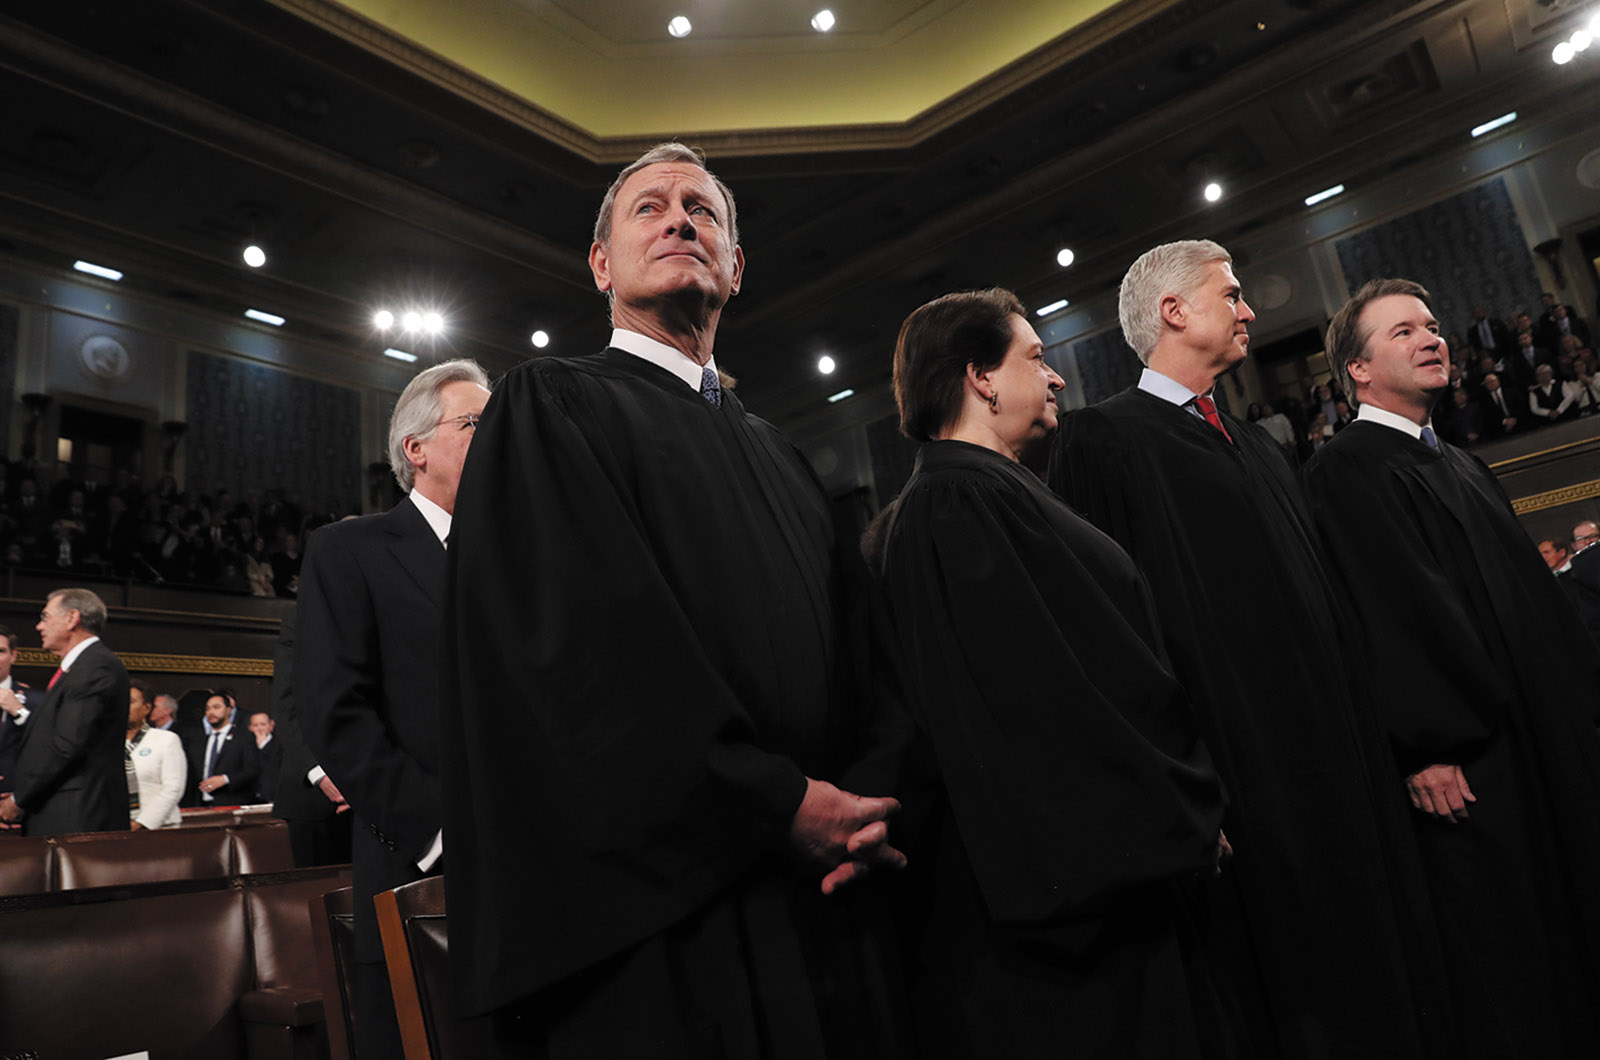 Chief Justice John Roberts and Associate Justices Elena Kagan, Neil Gorsuch, and Brett Kavanaugh